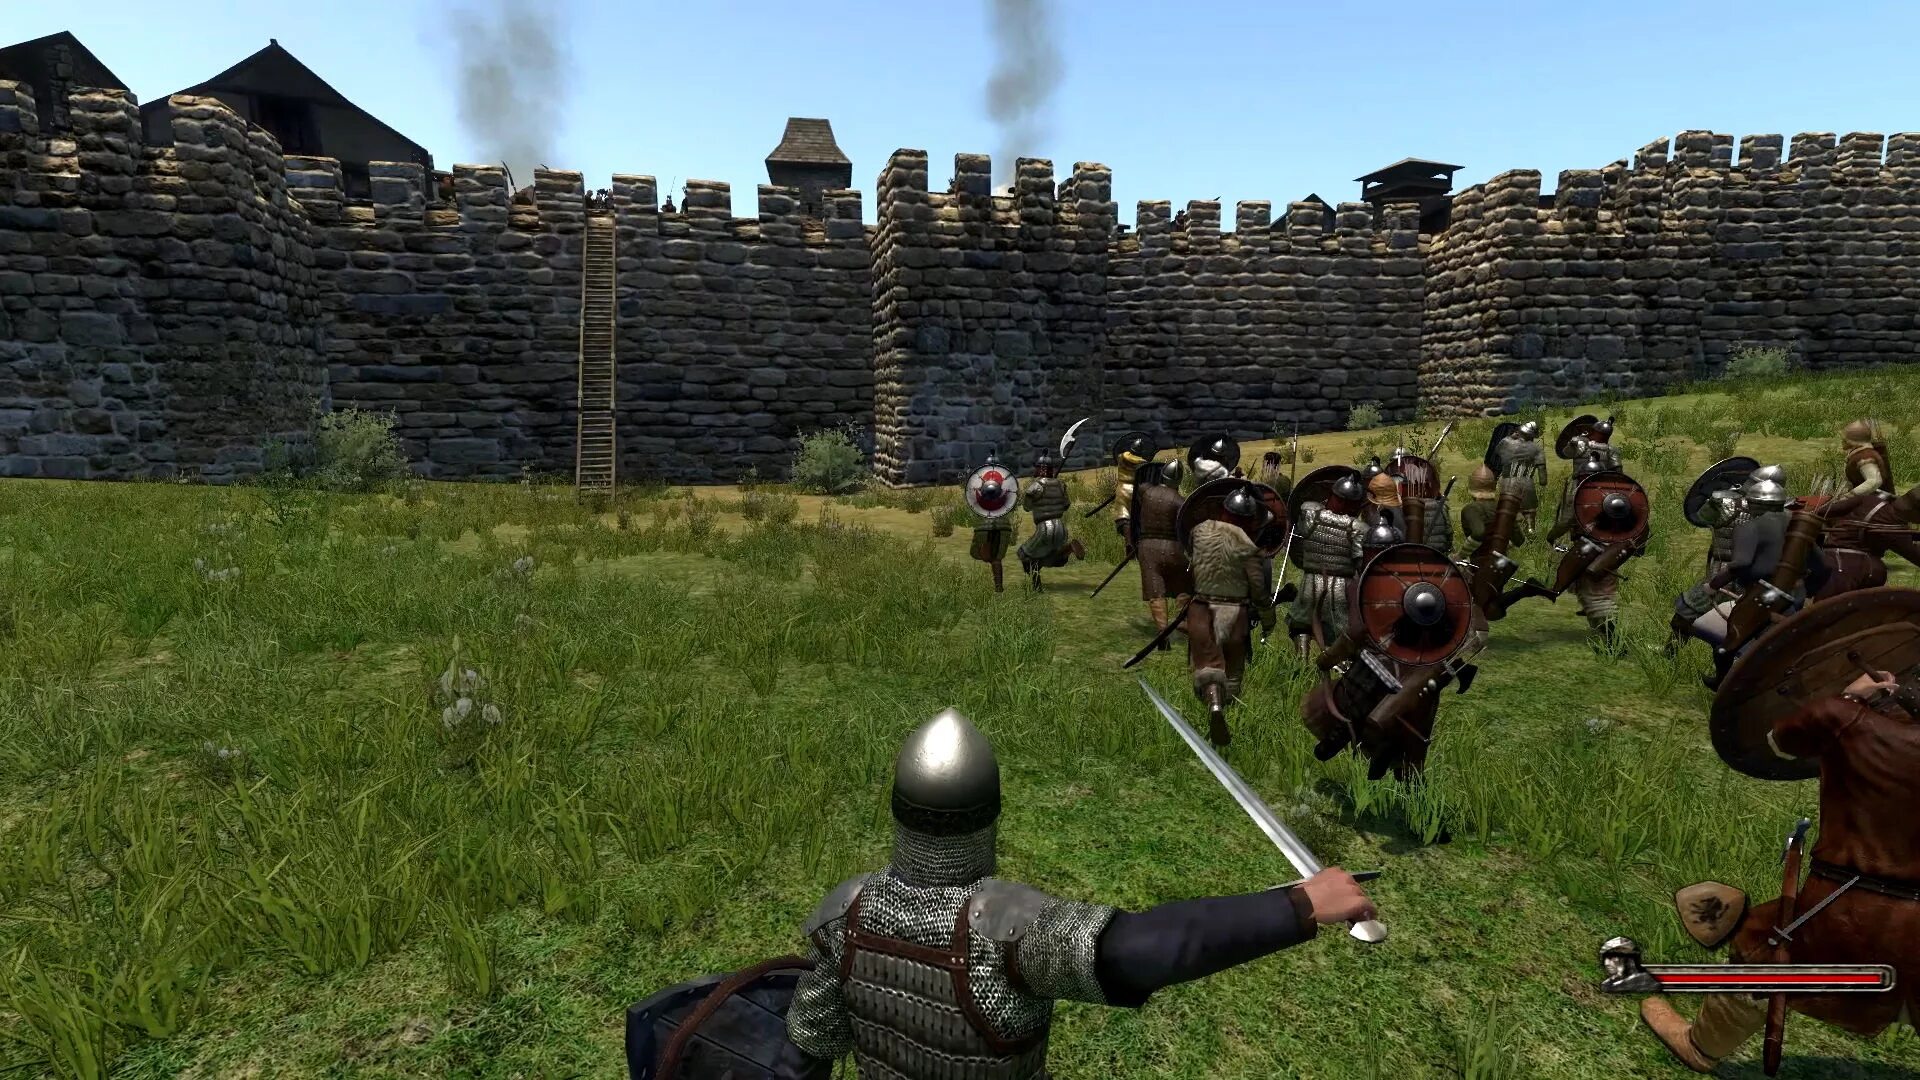 Mount & Blade: Warband. Mount and Blade 2010. Игра Mount & Blade 3. Варбанд баннерлорд.